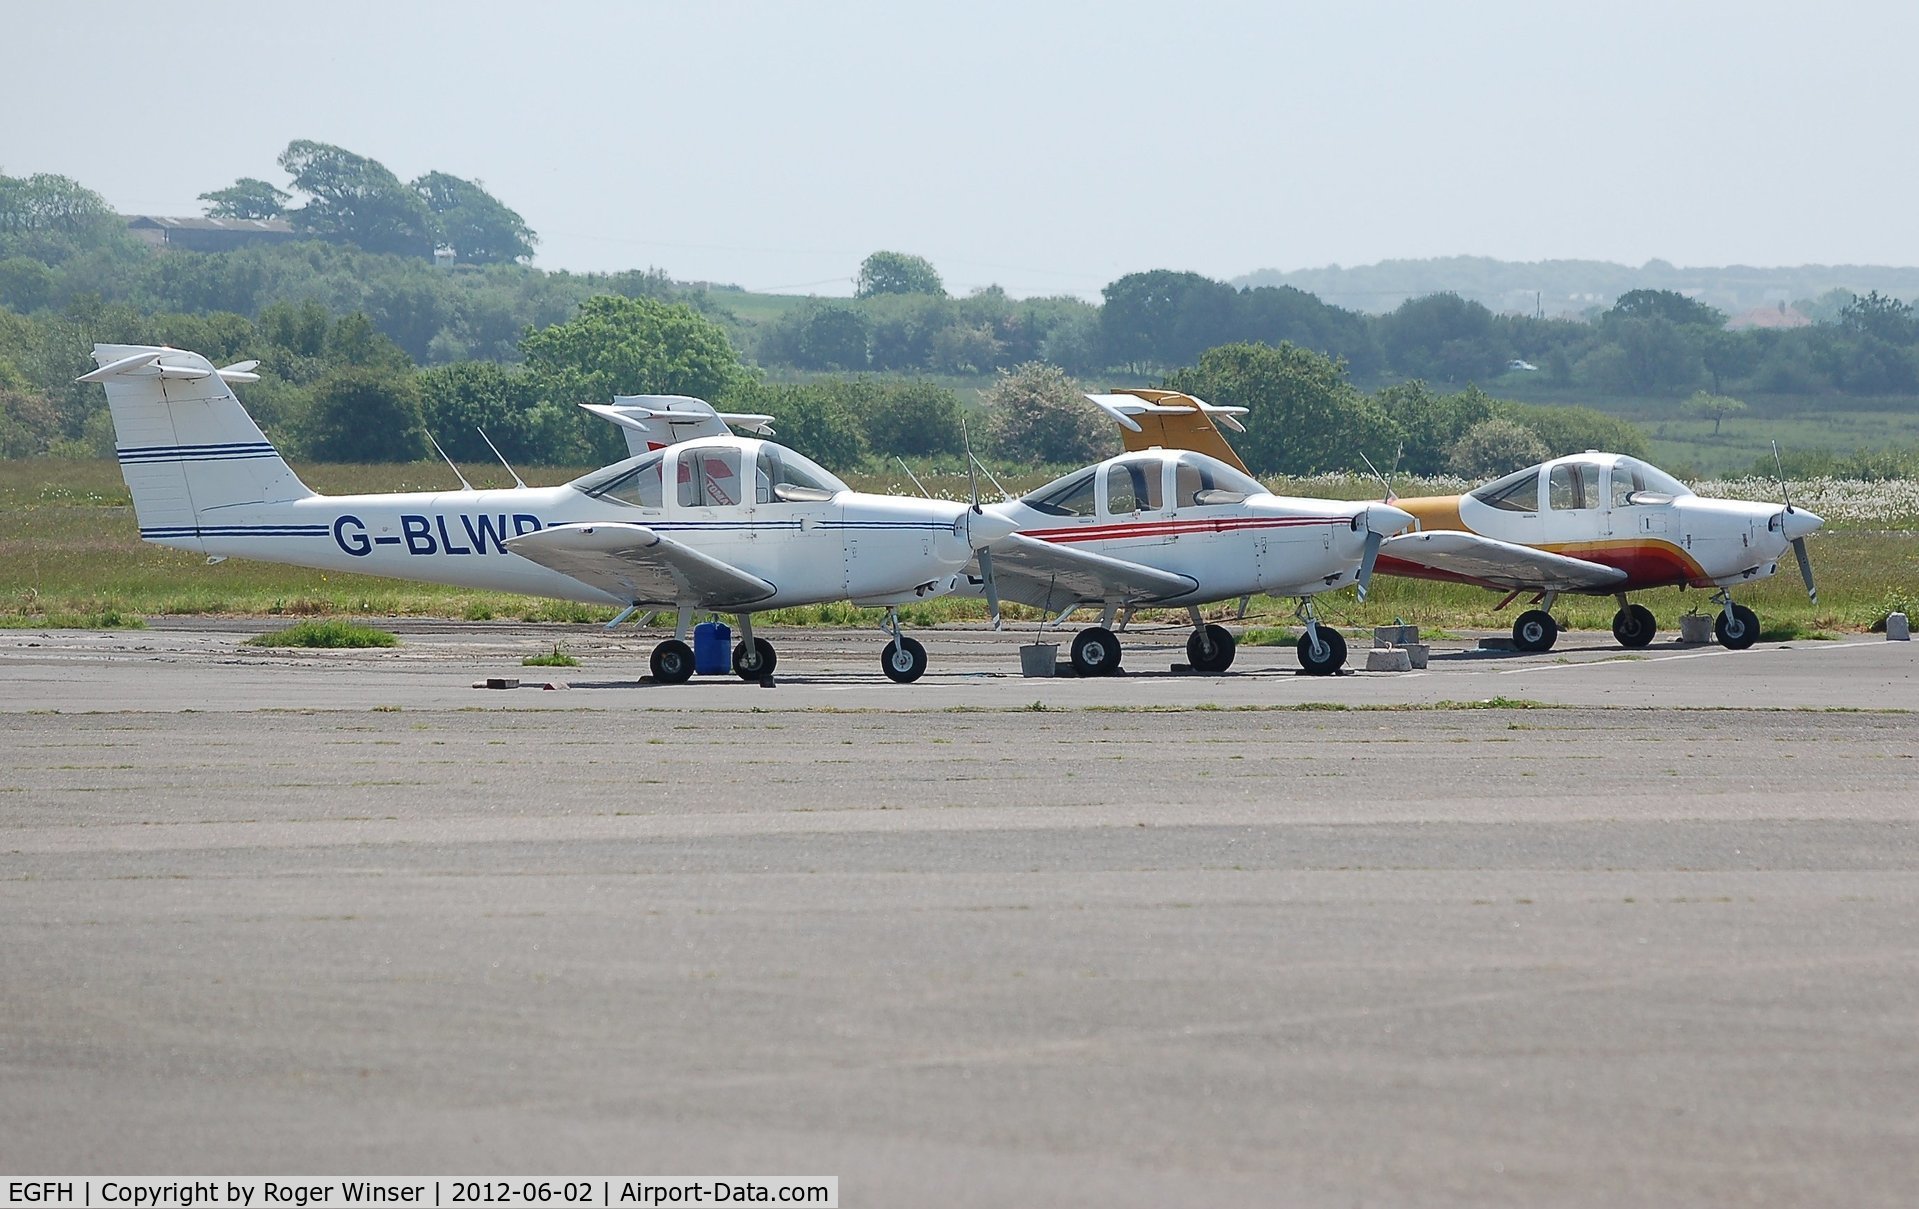 Swansea Airport, Swansea, Wales United Kingdom (EGFH) - Three of Cambrian Flying Club's Piper Tomahawk aircraft.